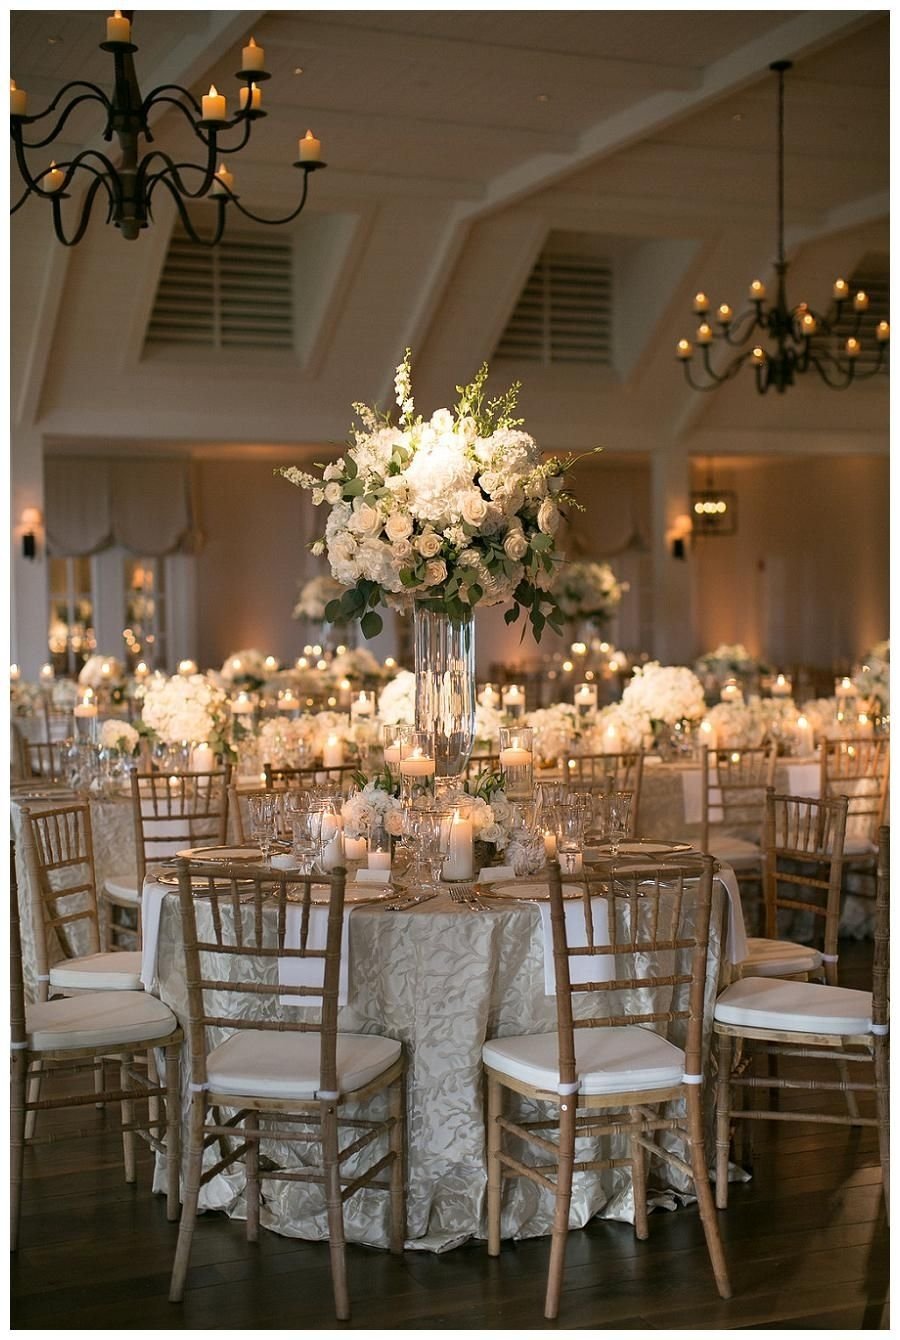 10 Most Recommended Wedding Reception Table Decoration Ideas pic photo wedding decoration ideas for tables at reception small 2022